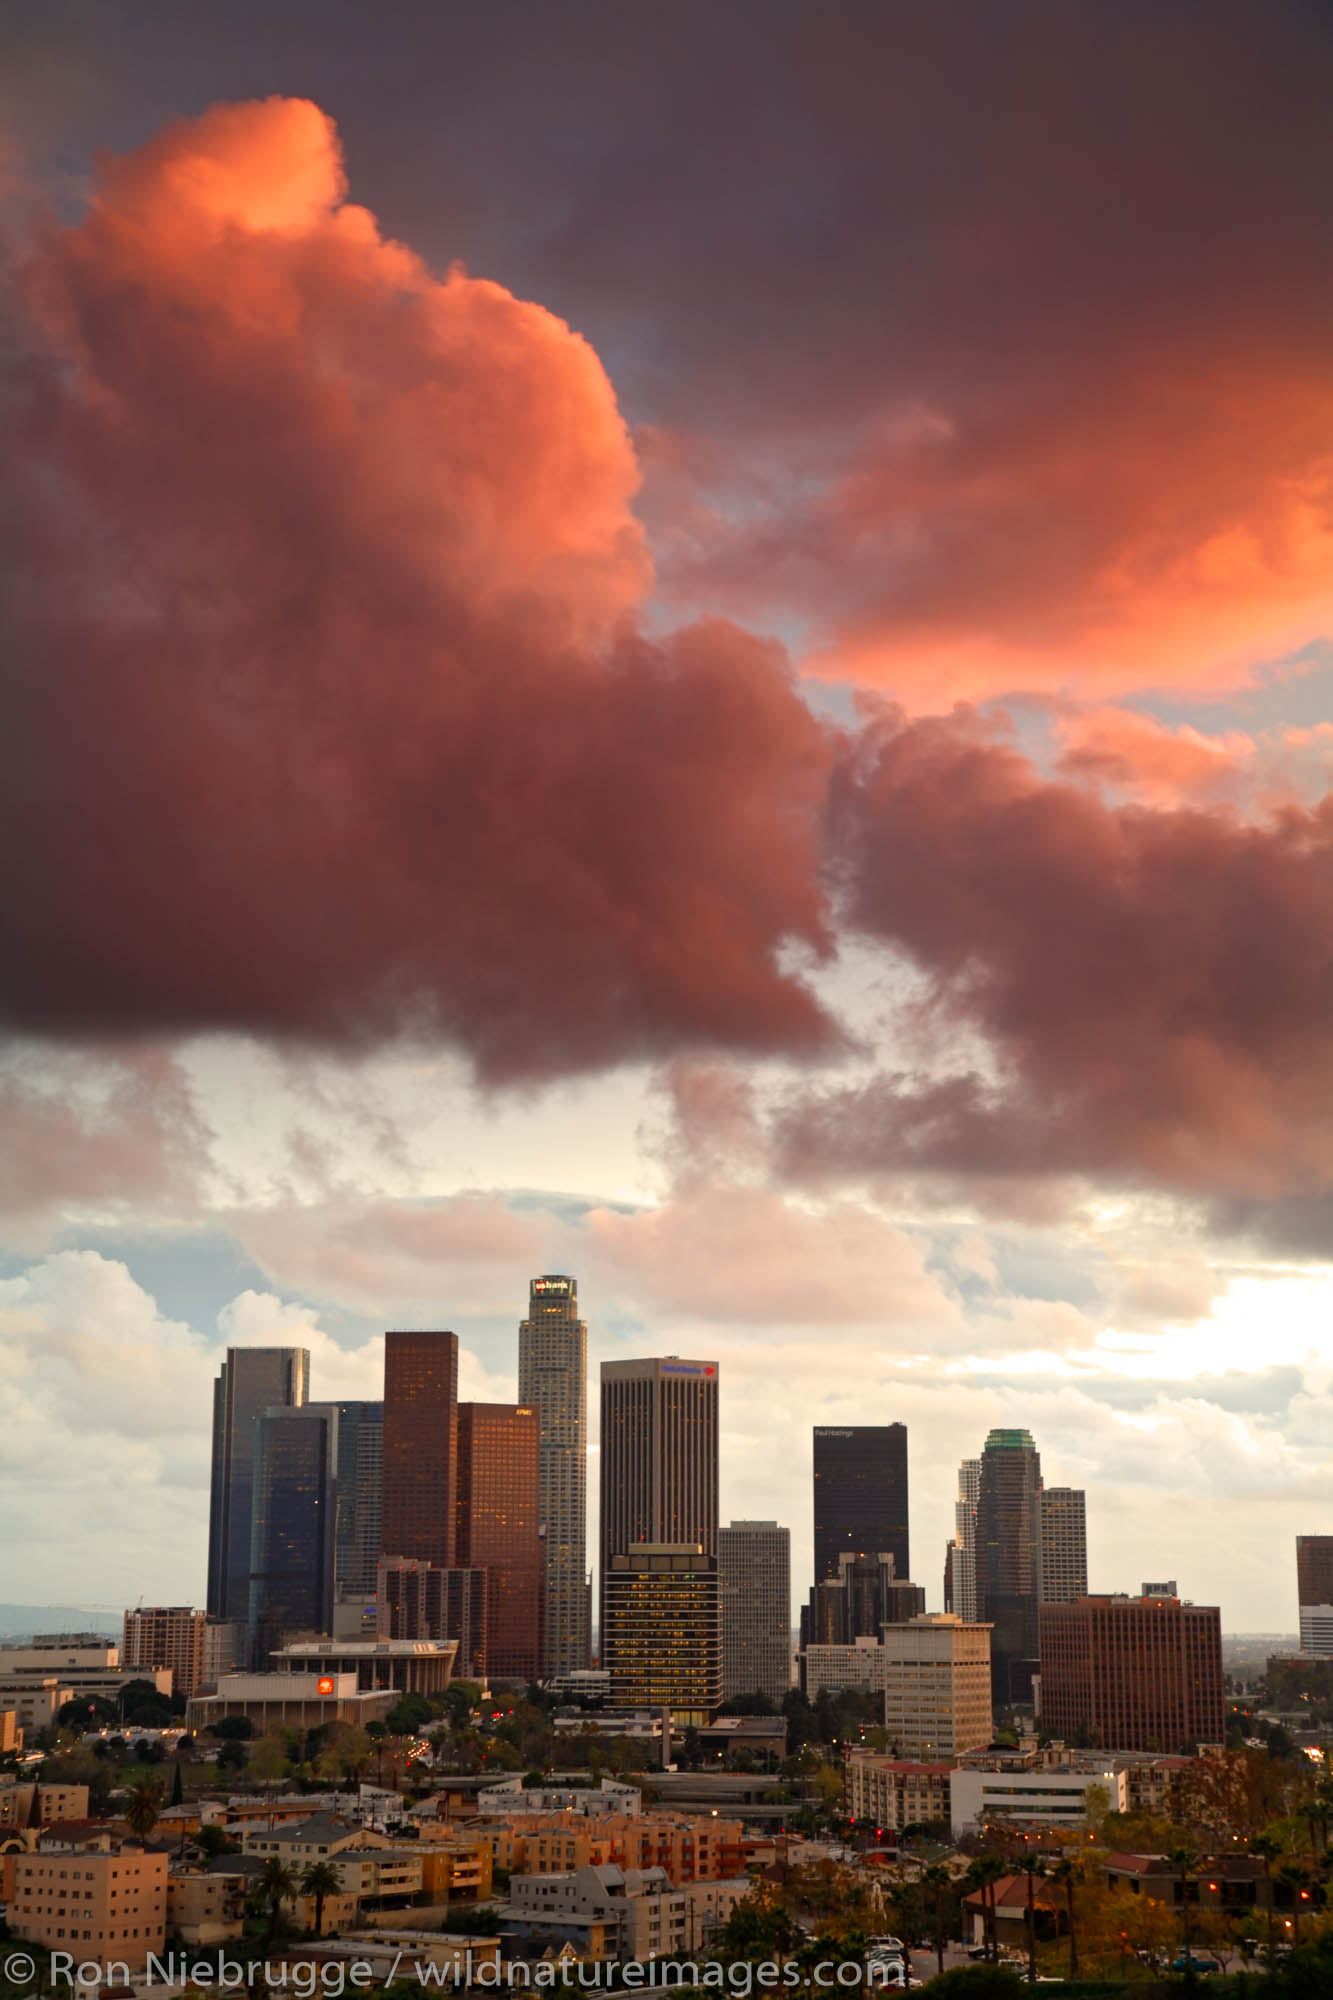 Los Angeles city skyline during a colorful sunset, Los Angeles, California.